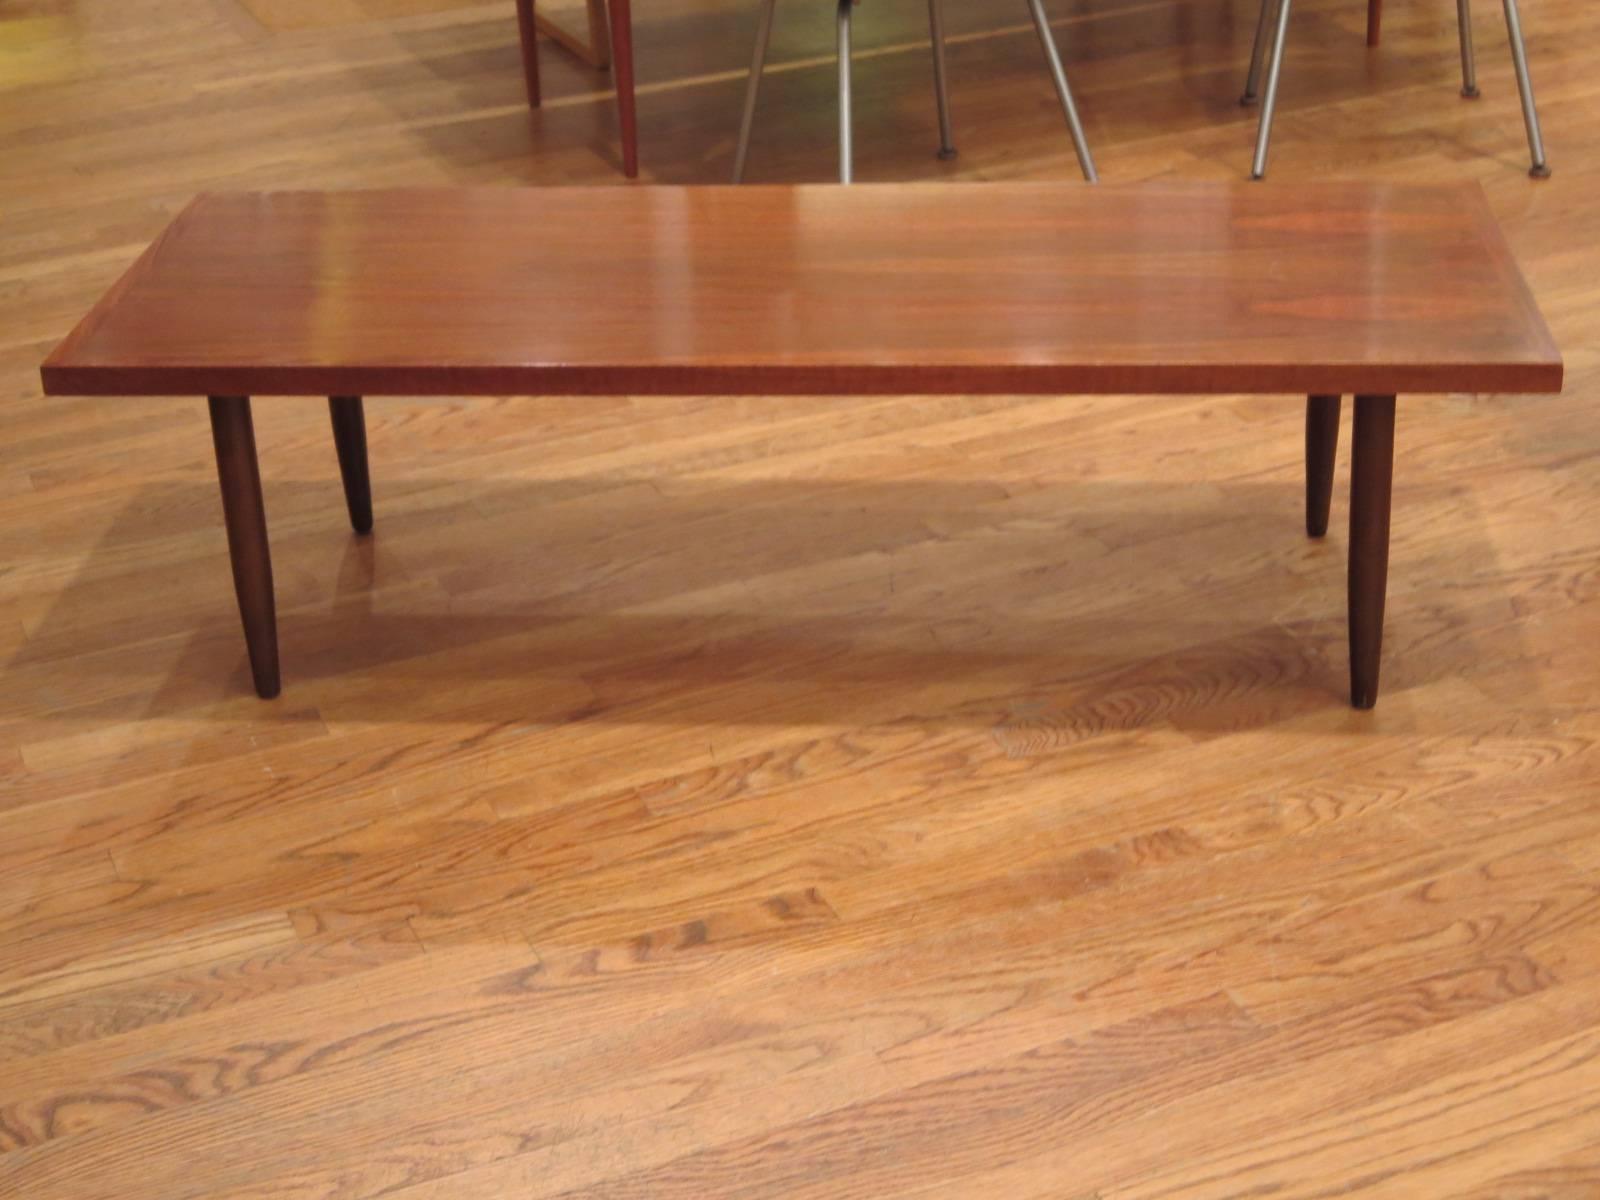 Beautiful matchbook wood grain, 1960's bench / coffee table.  Versatile and elegant proportions, can be used in any room.